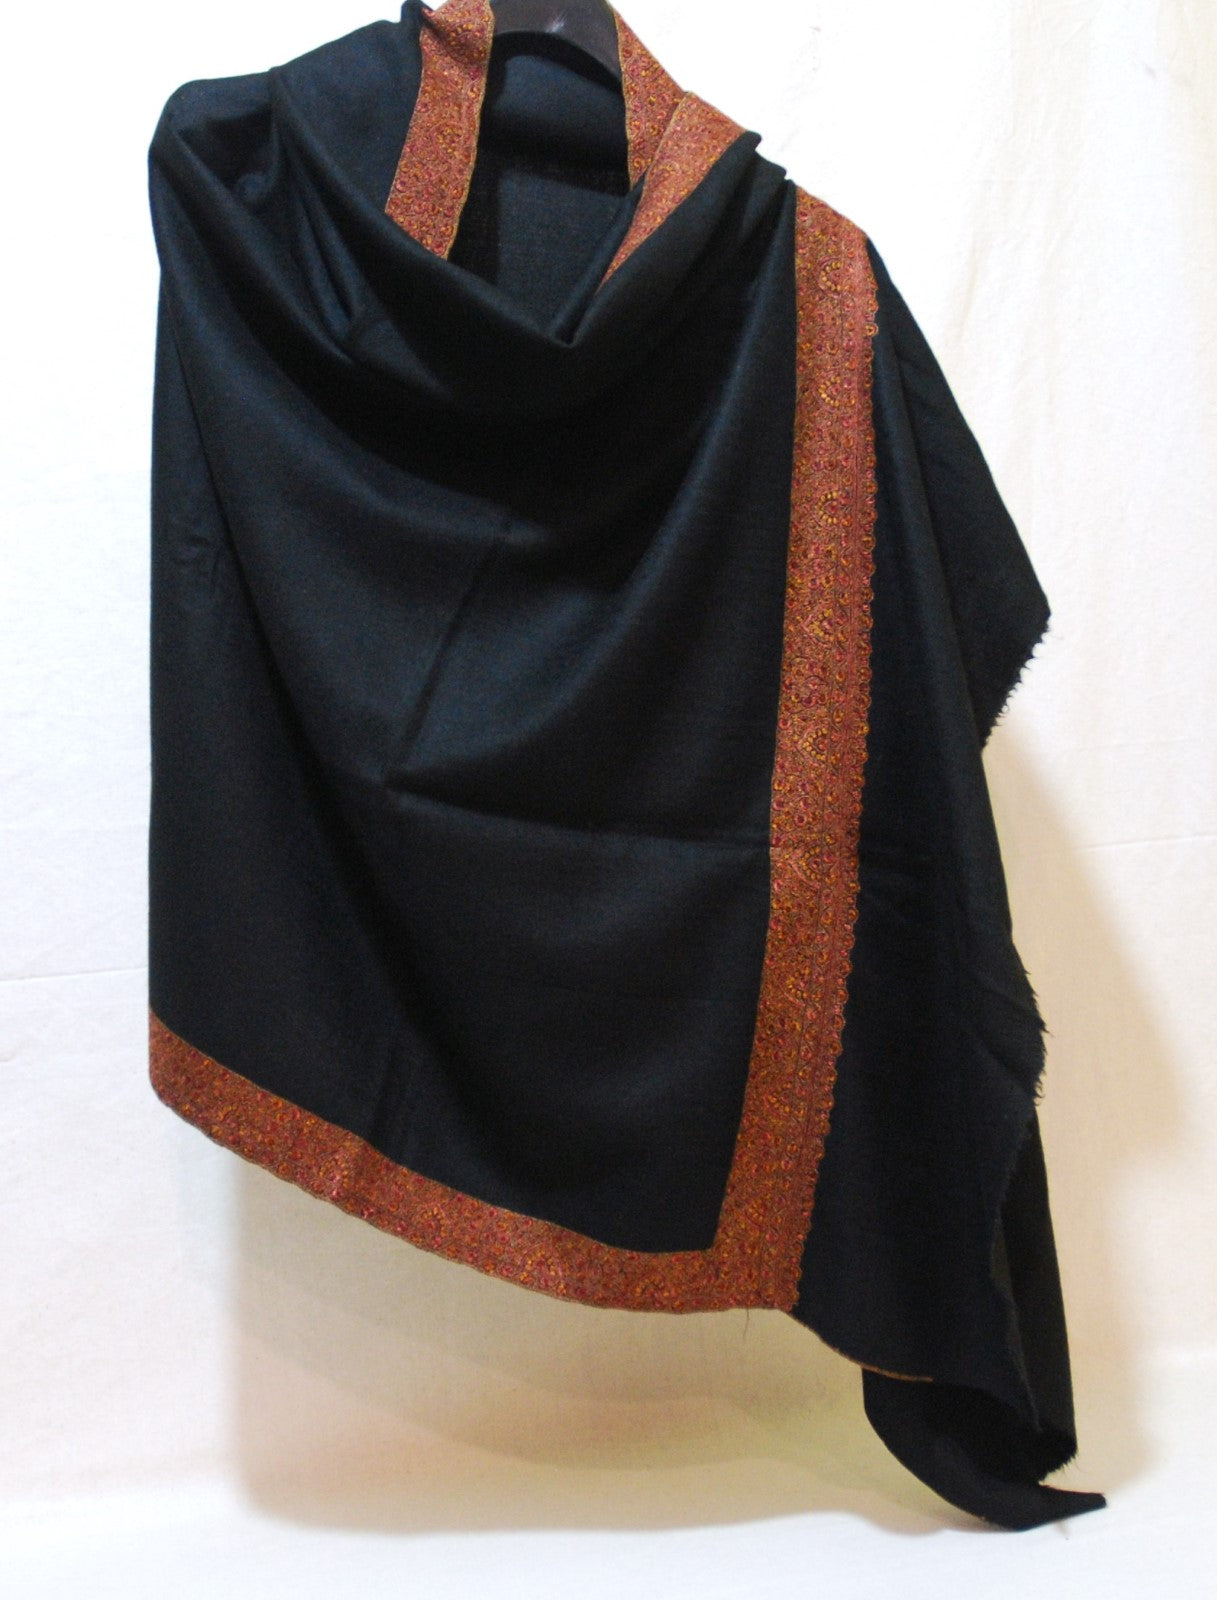 Kashmir Pashmina "Cashmere" Embroidered Shawl Black, Multicolor Embroidery #PDR-006